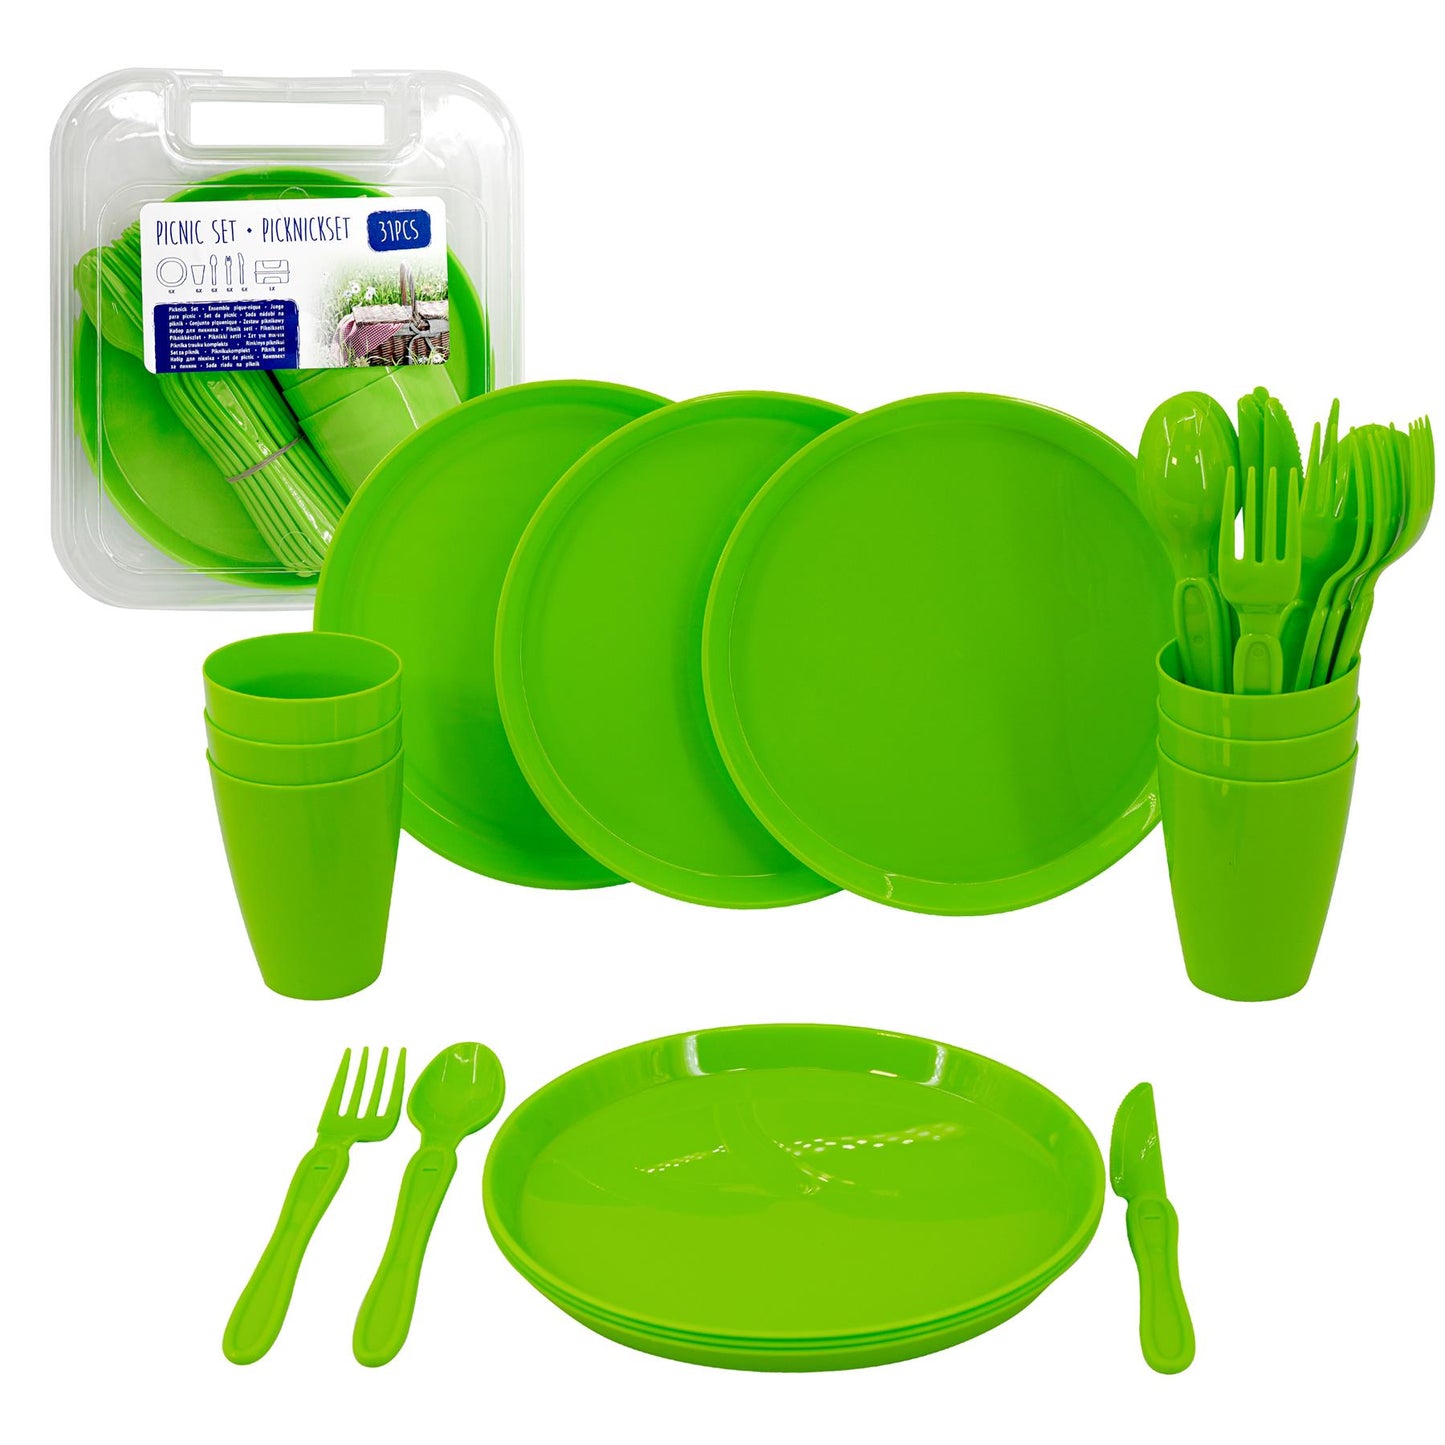 Camping Set For Six 31 PCS by GEEZY - UKBuyZone